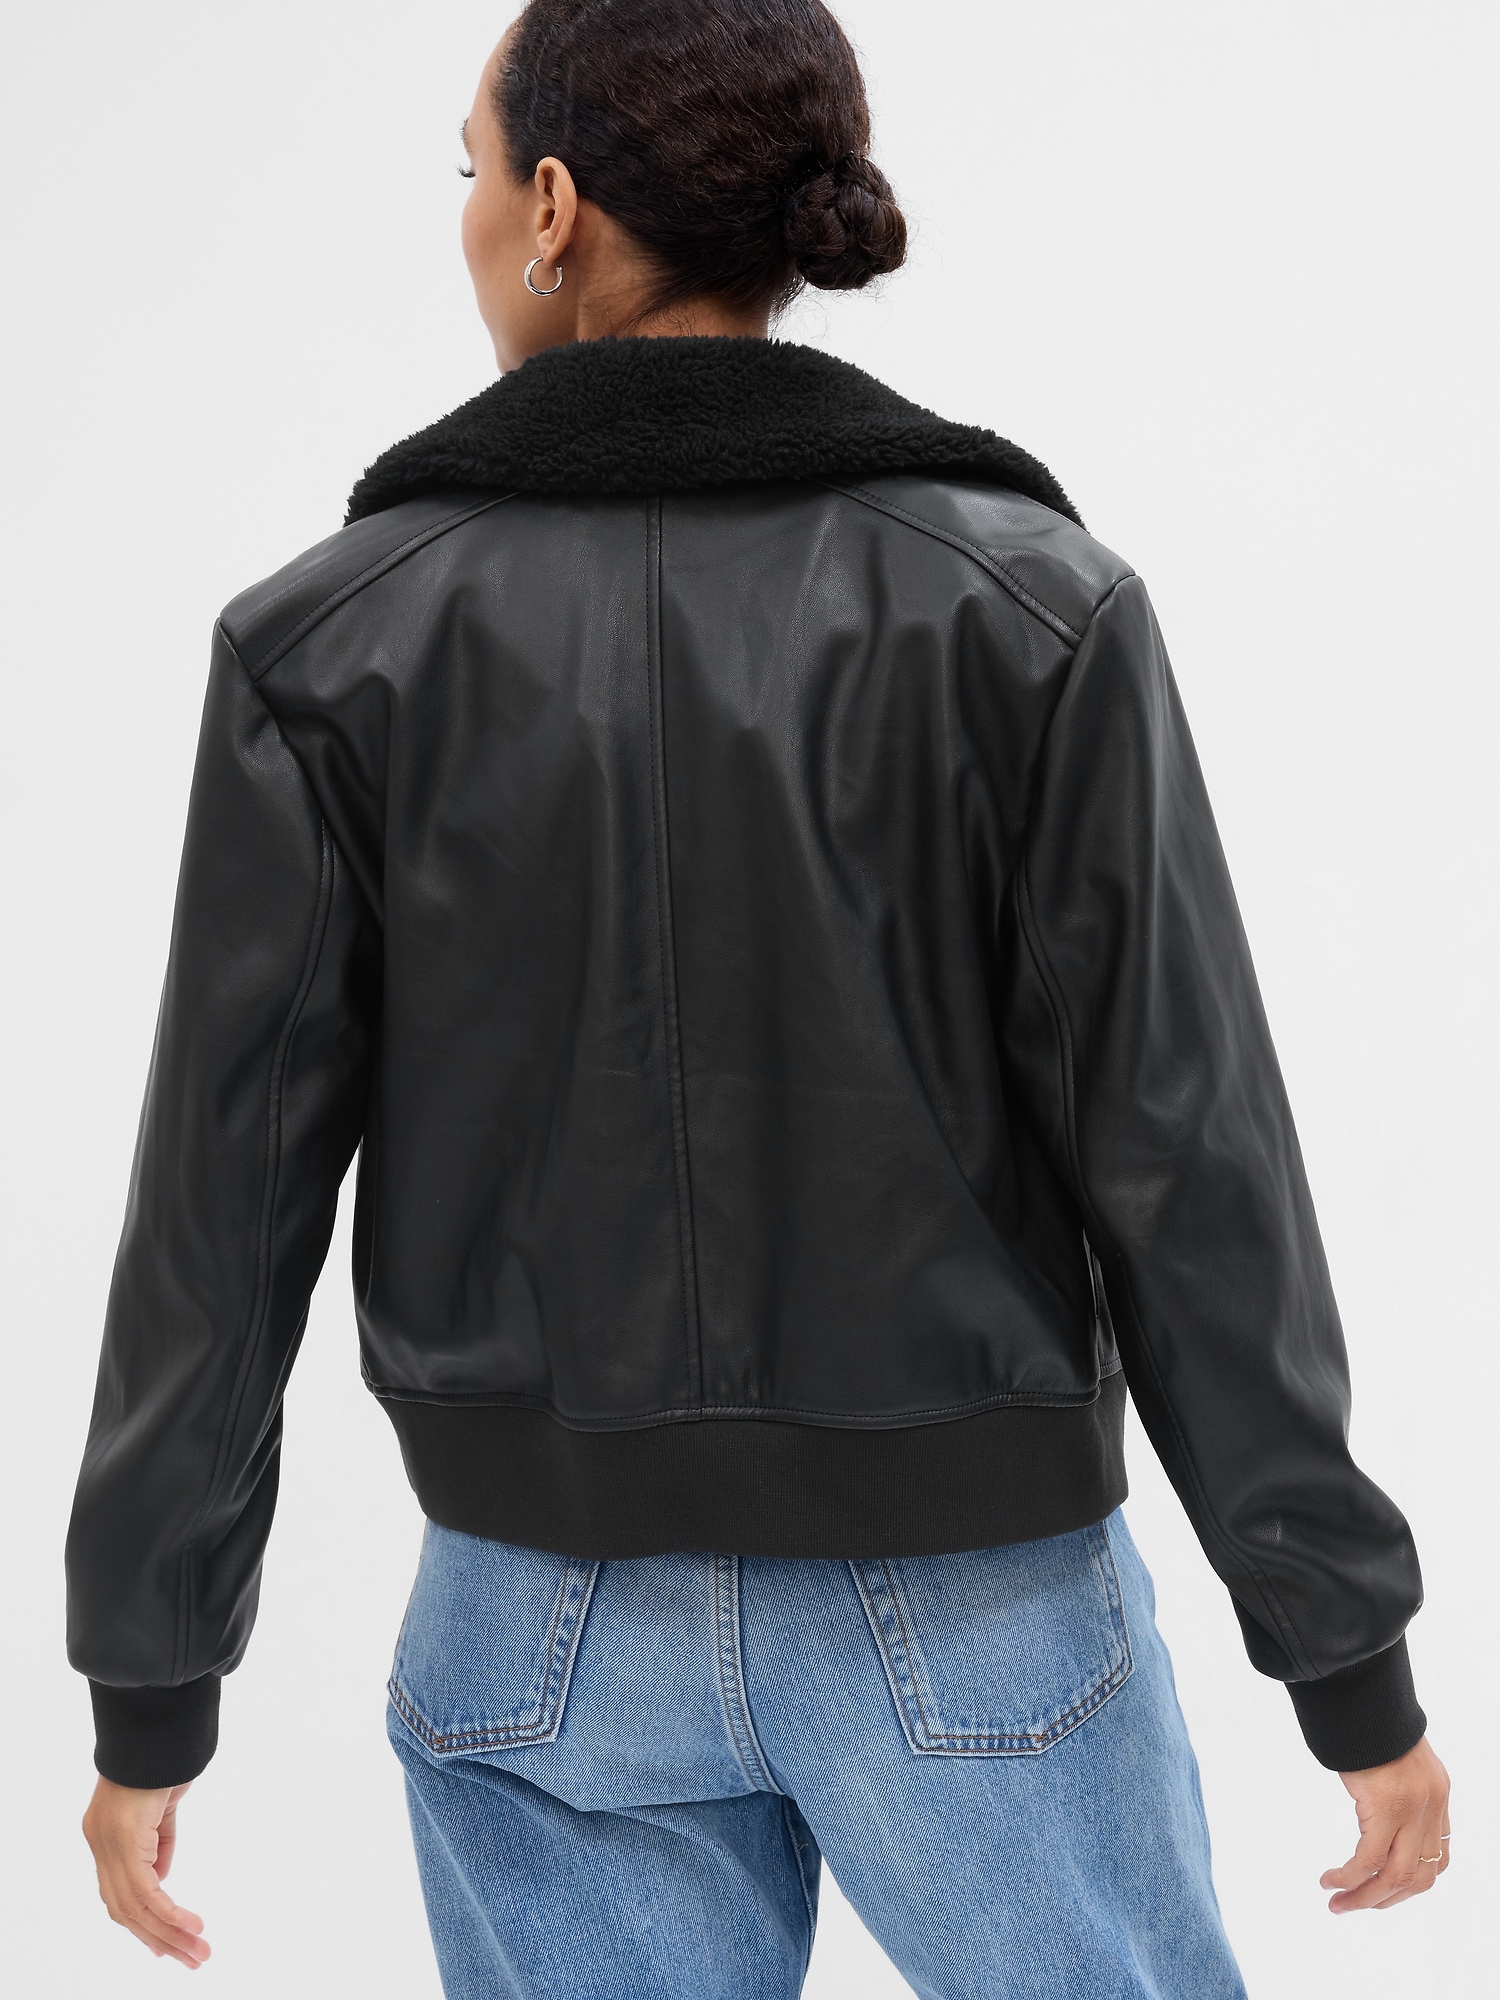 Bomber Jacket: How to Wear + Our Affordable Picks